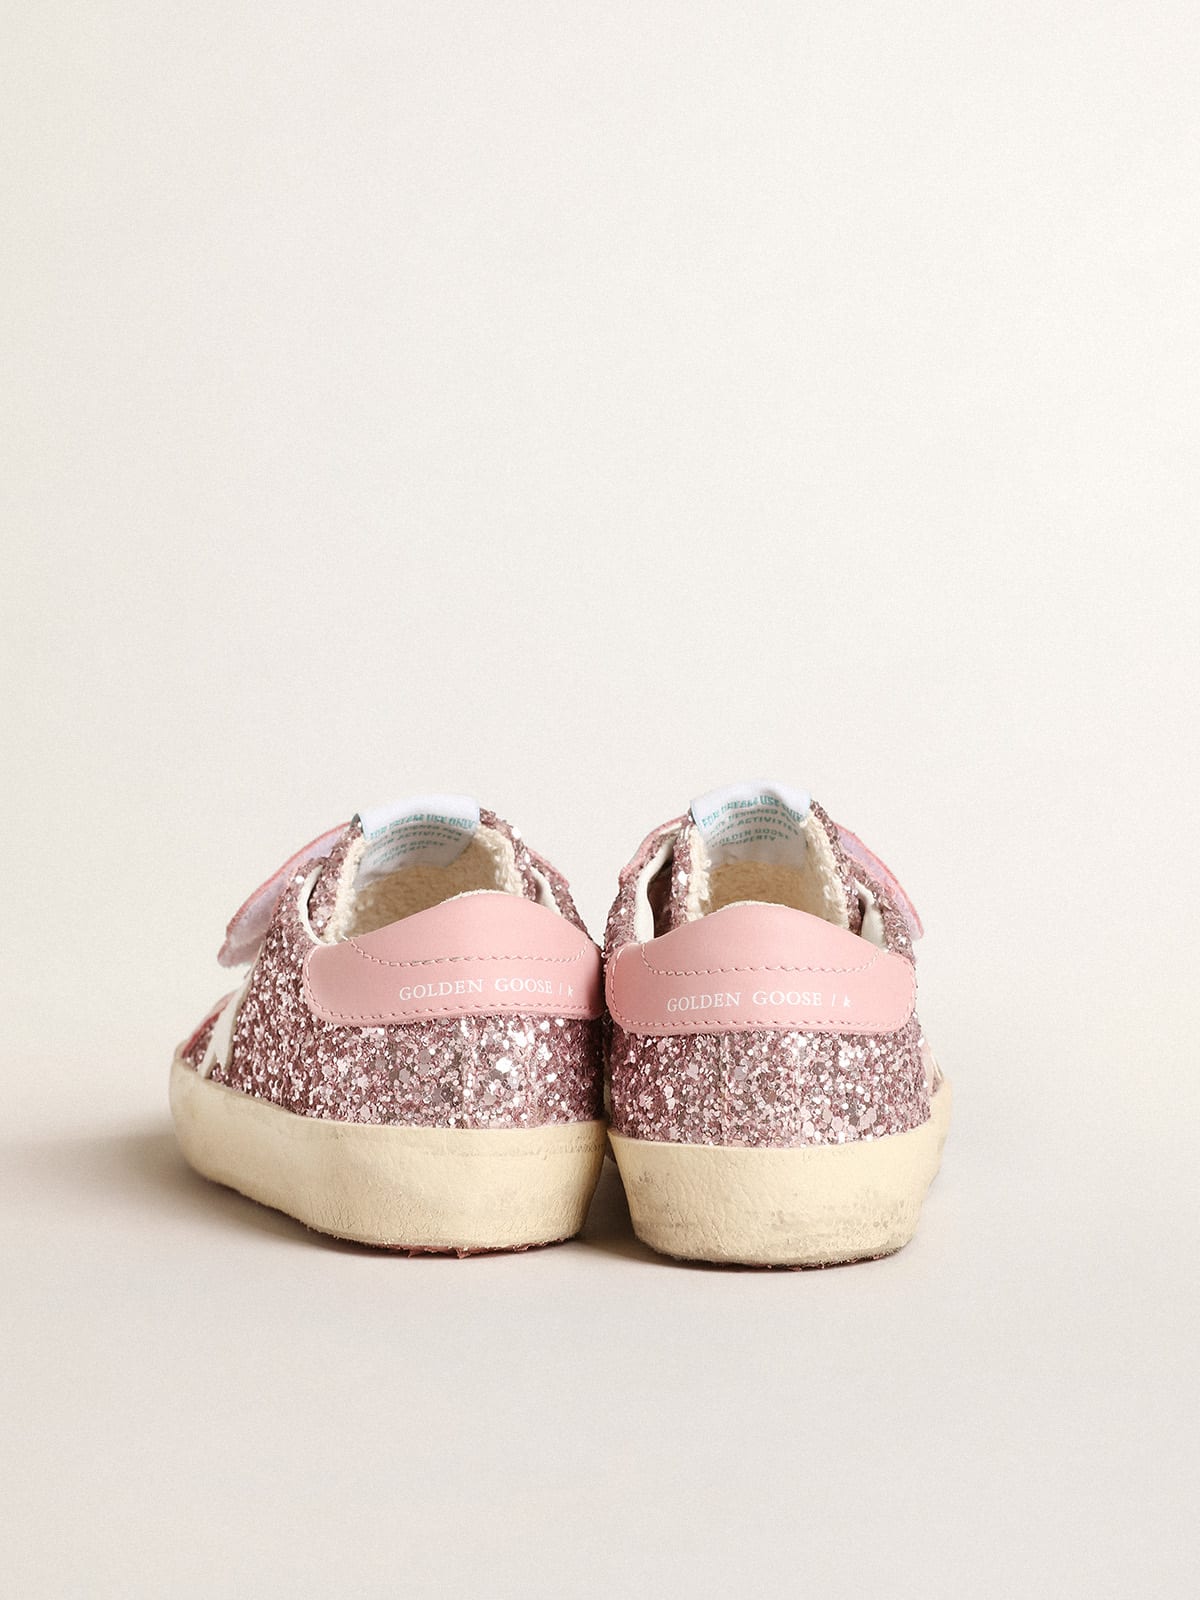 Golden Goose - Old School Young in lilac glitter with white star and pink heel tab in 